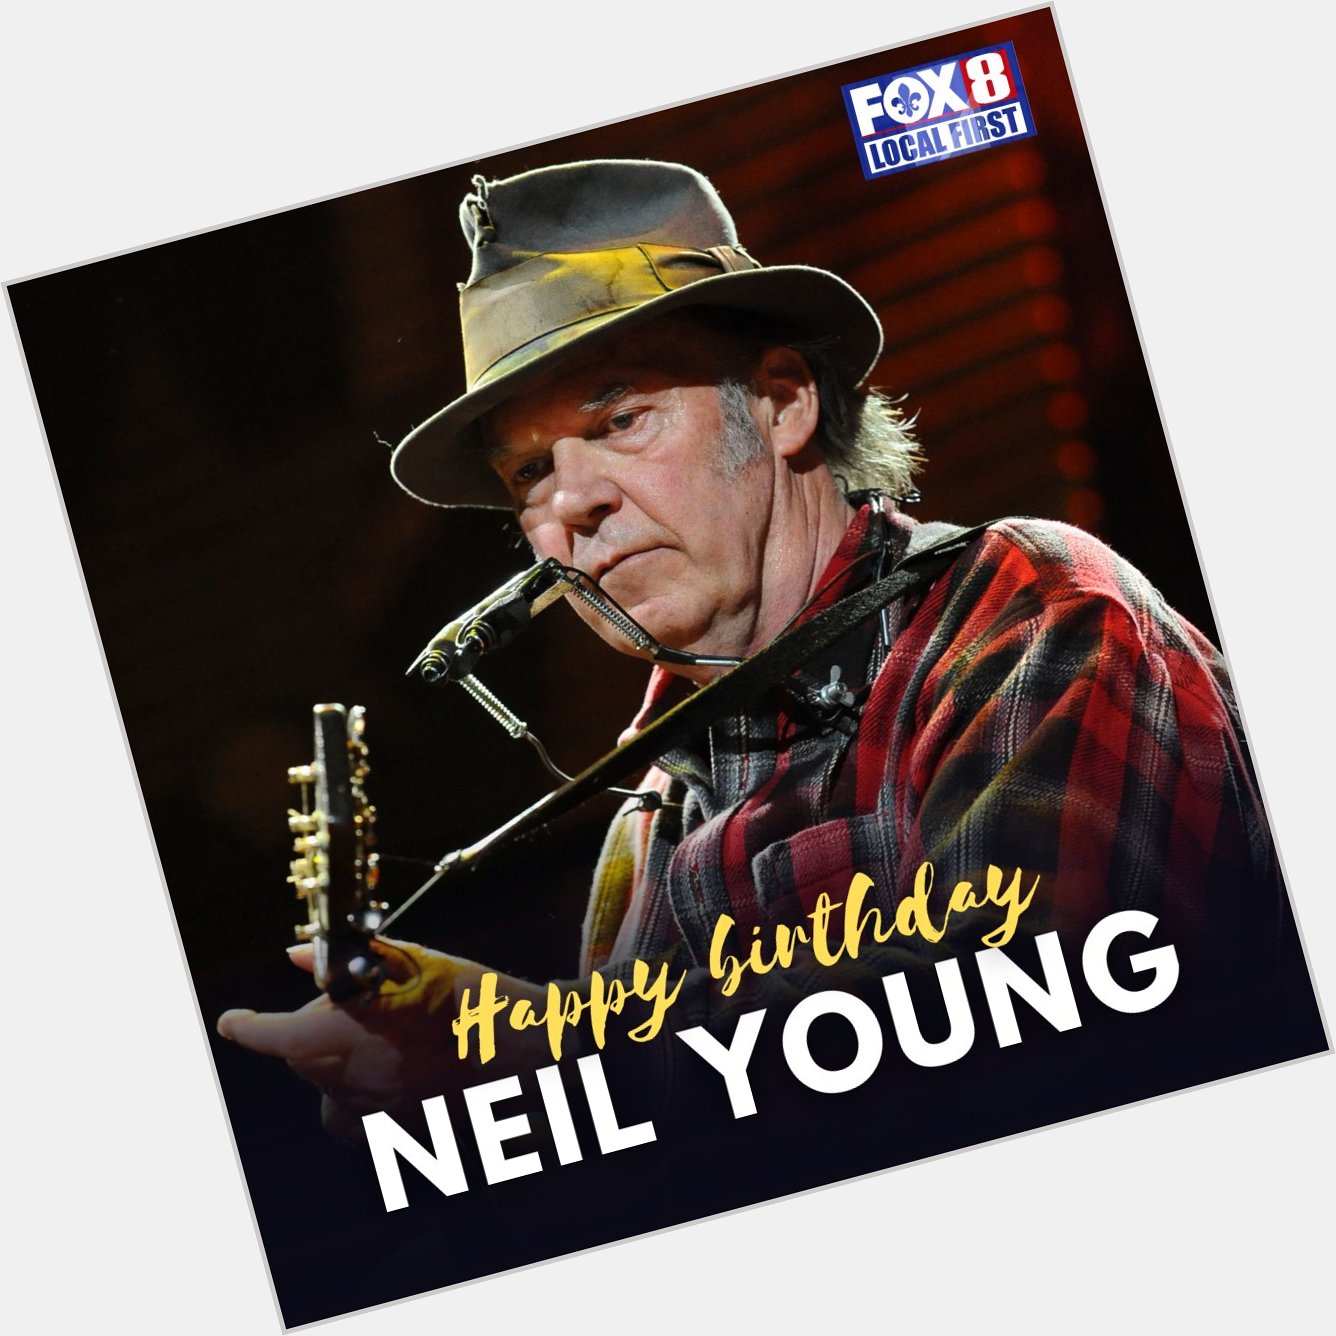 Rock-n-roll legend Neil Young turns 76 today!
Happy birthday, Neil! Keep on rockin\ the free world. 